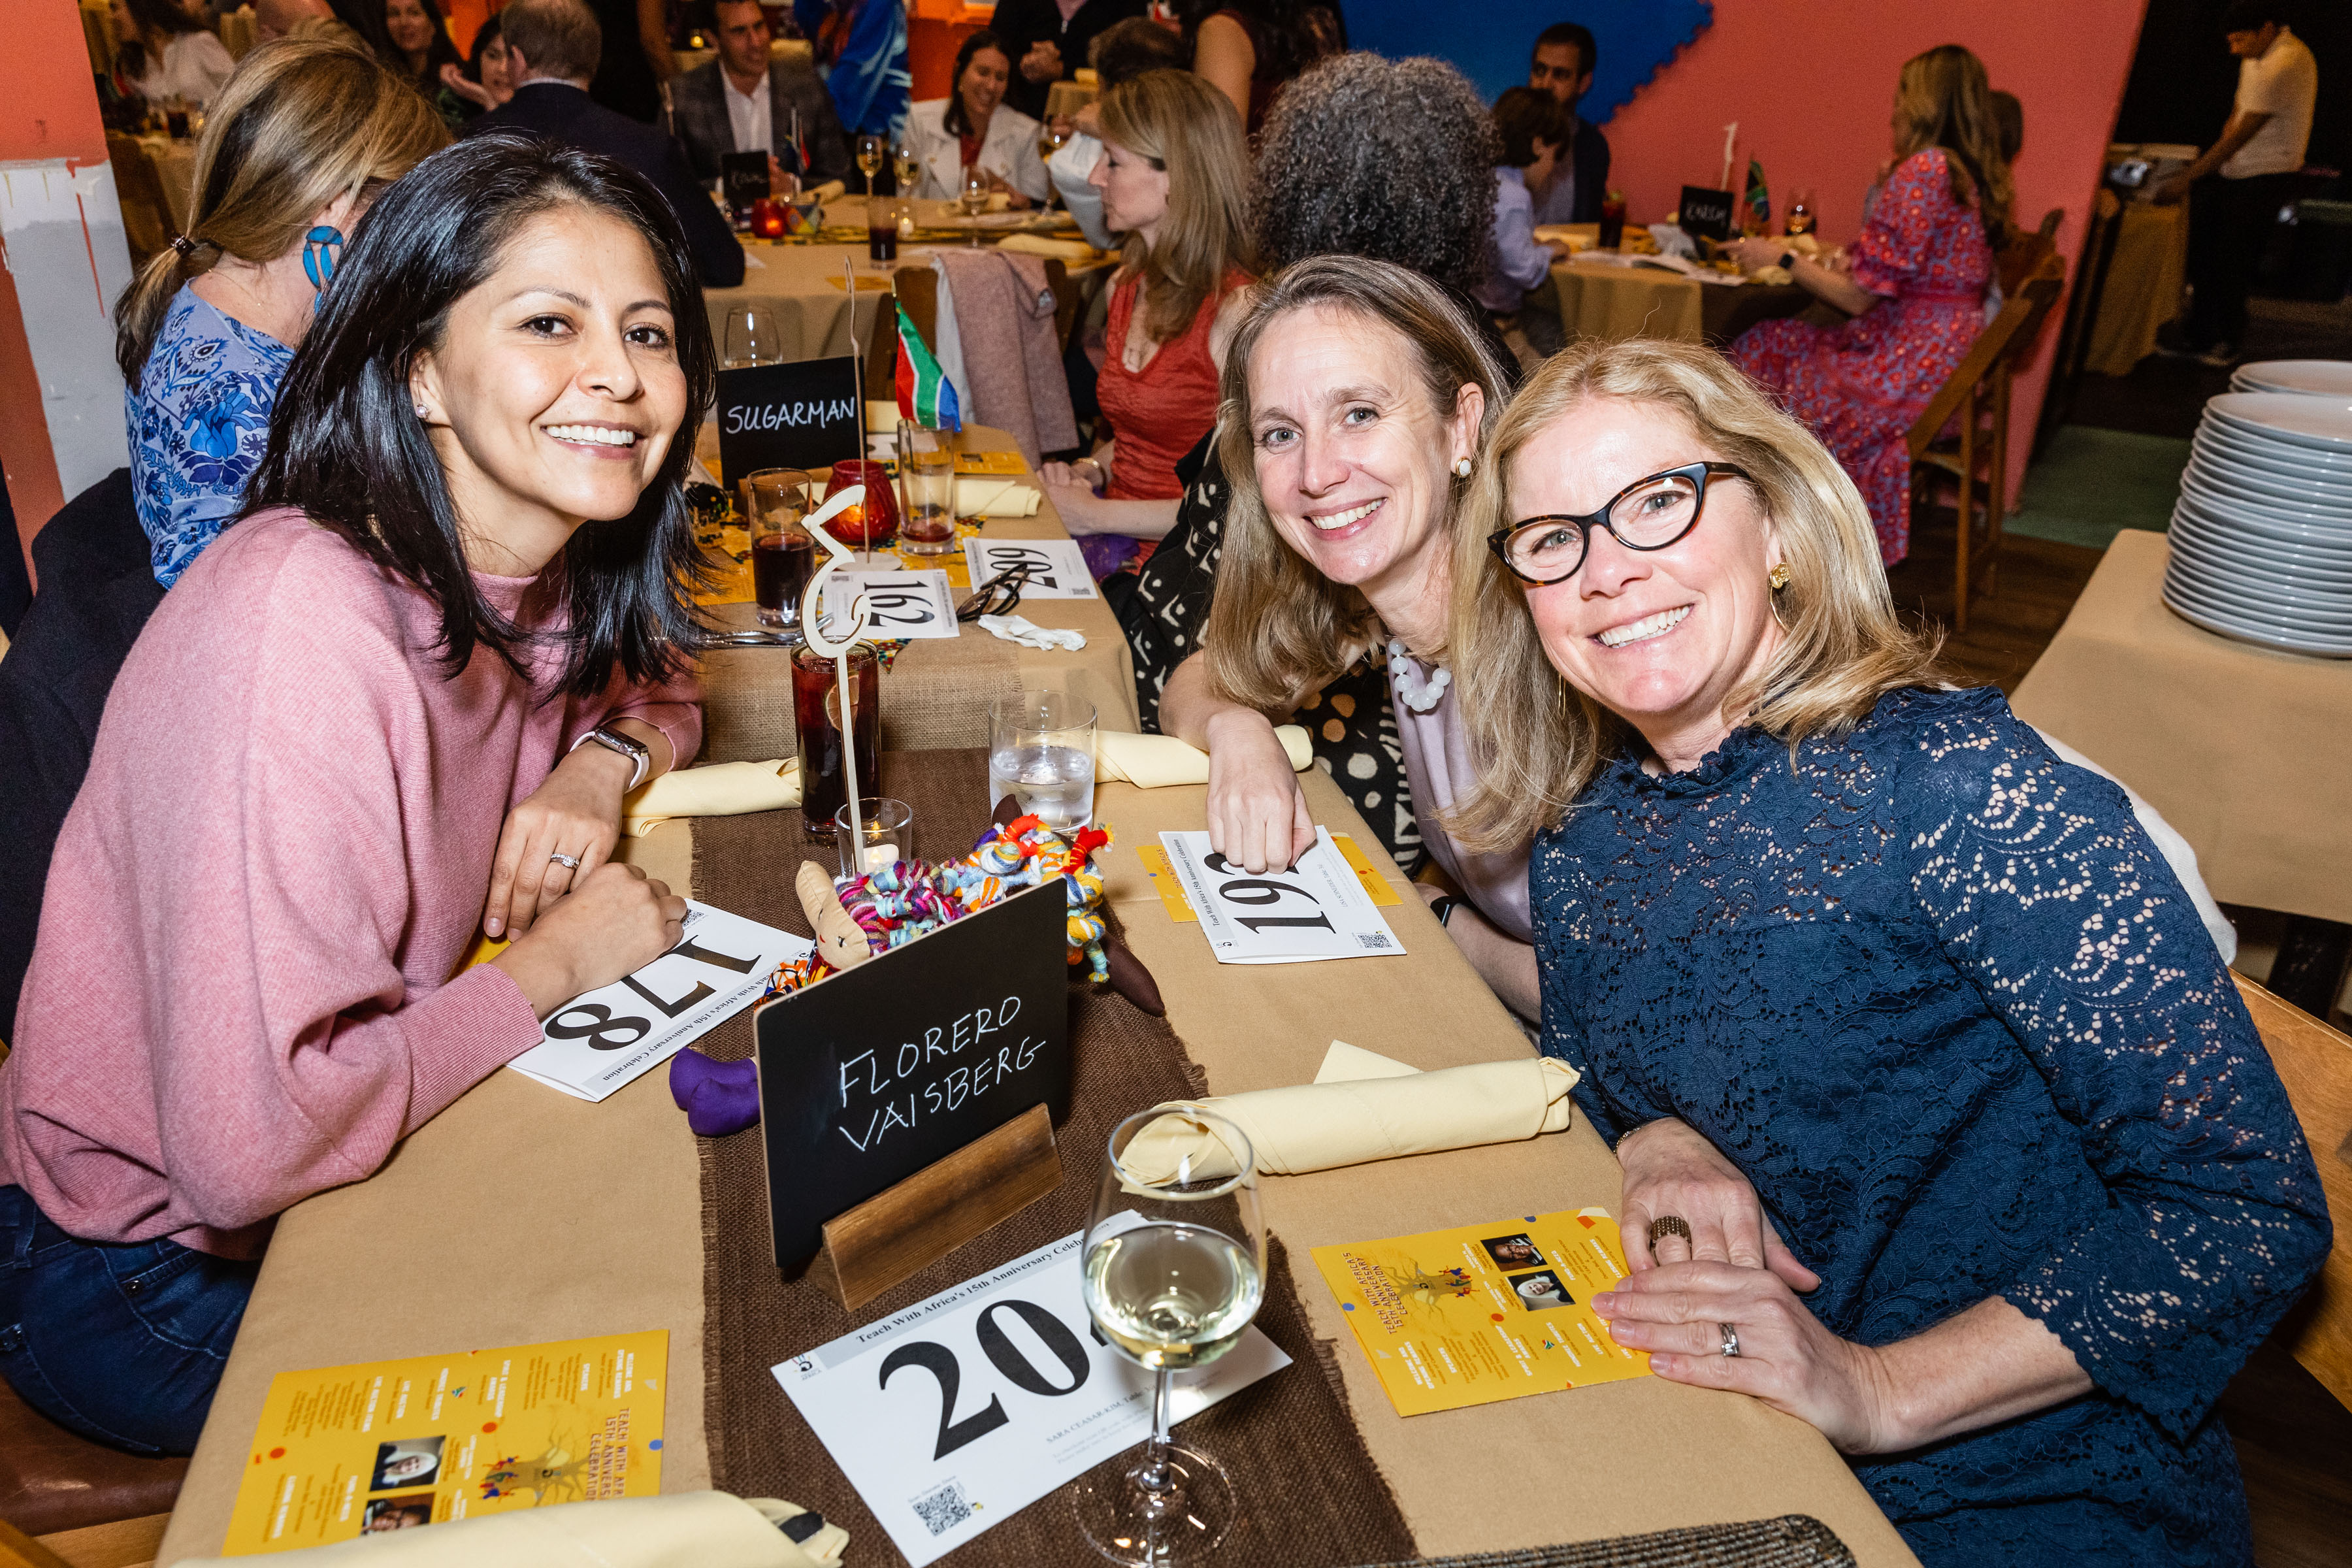 SAN FRANCISCO, CA - March 30 - Marilyn Cornedo, Mary Cesar Camp and Lisa Schneider attend Teach With Africa 15th Anniversary Celebrations on March 30th 2023 at Bissap Baobab SF @ 2243 Mission St, SF, CA 94110 US in San Francisco, CA (Photo - Ando Caulfield for Drew Altizer Photography)